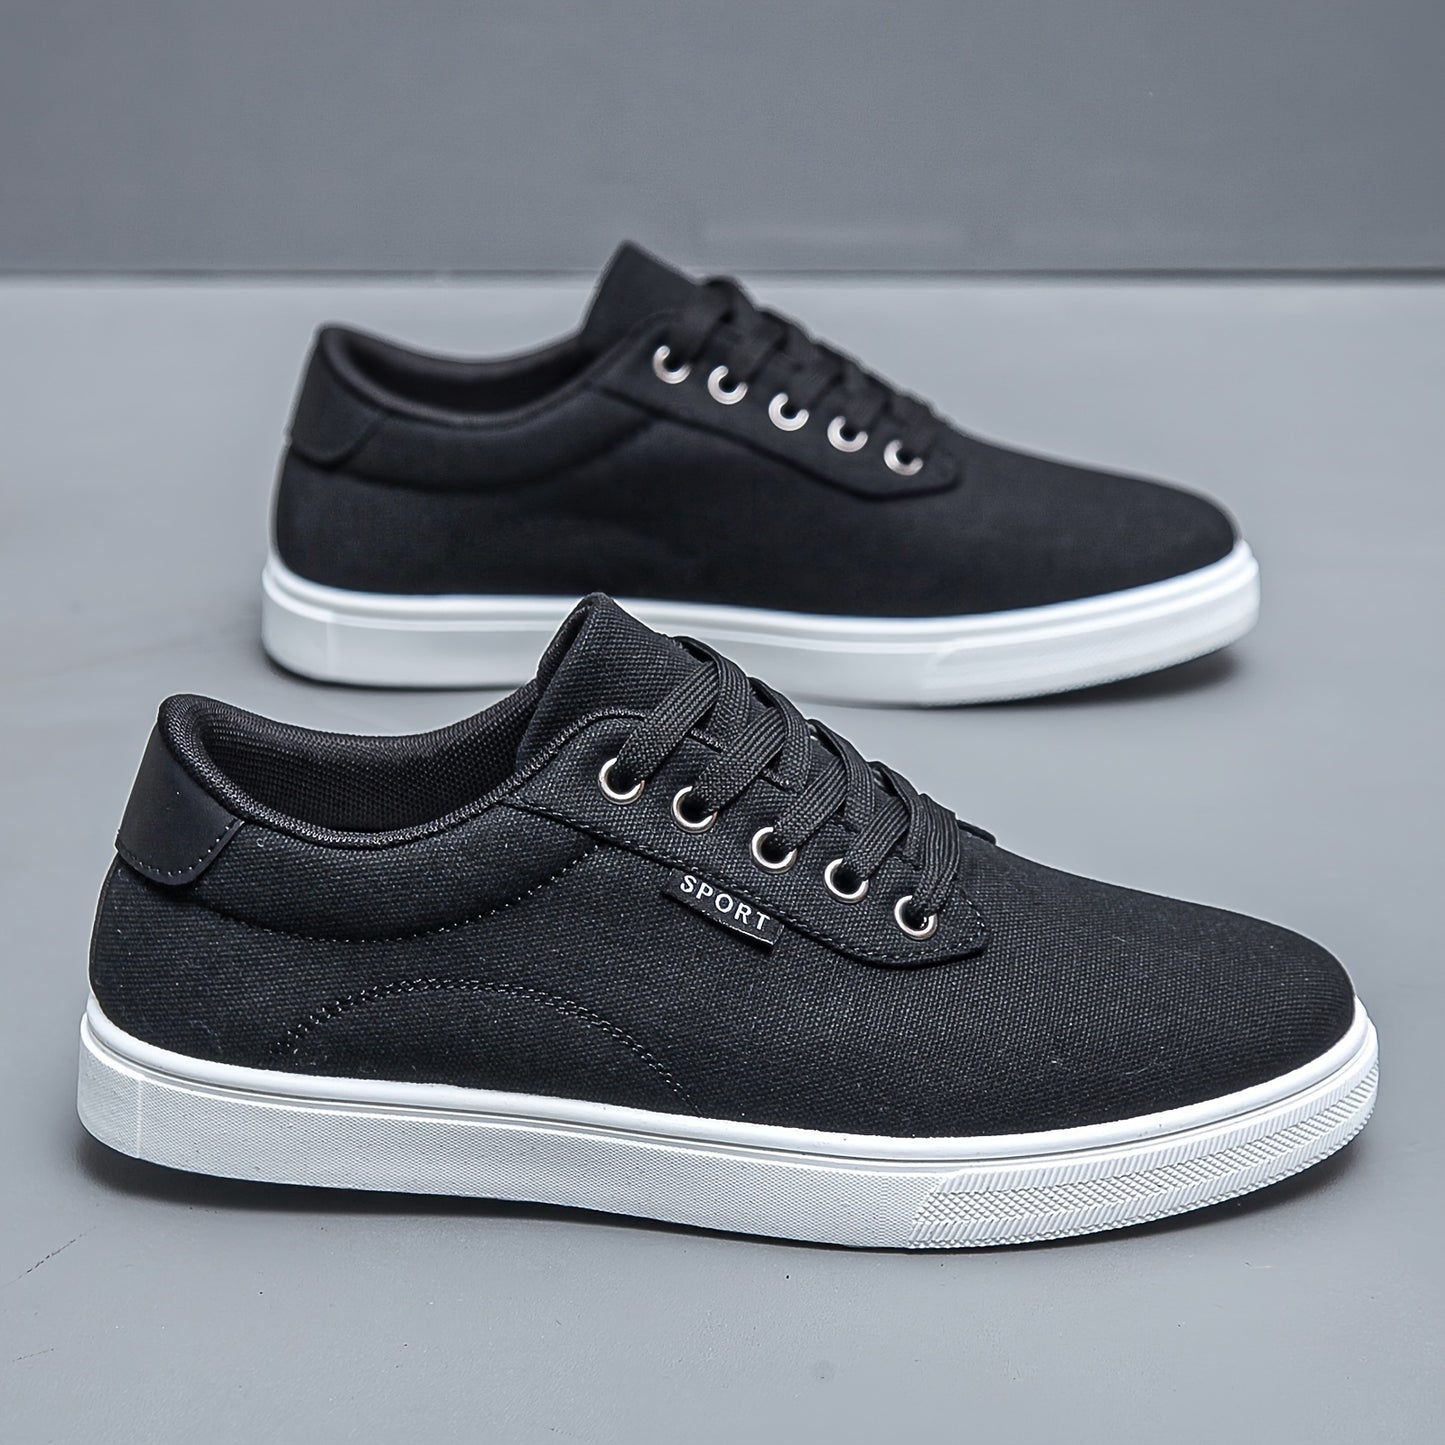 Solid Skate Shoes, Comfy Non Slip Street Style Sneakers